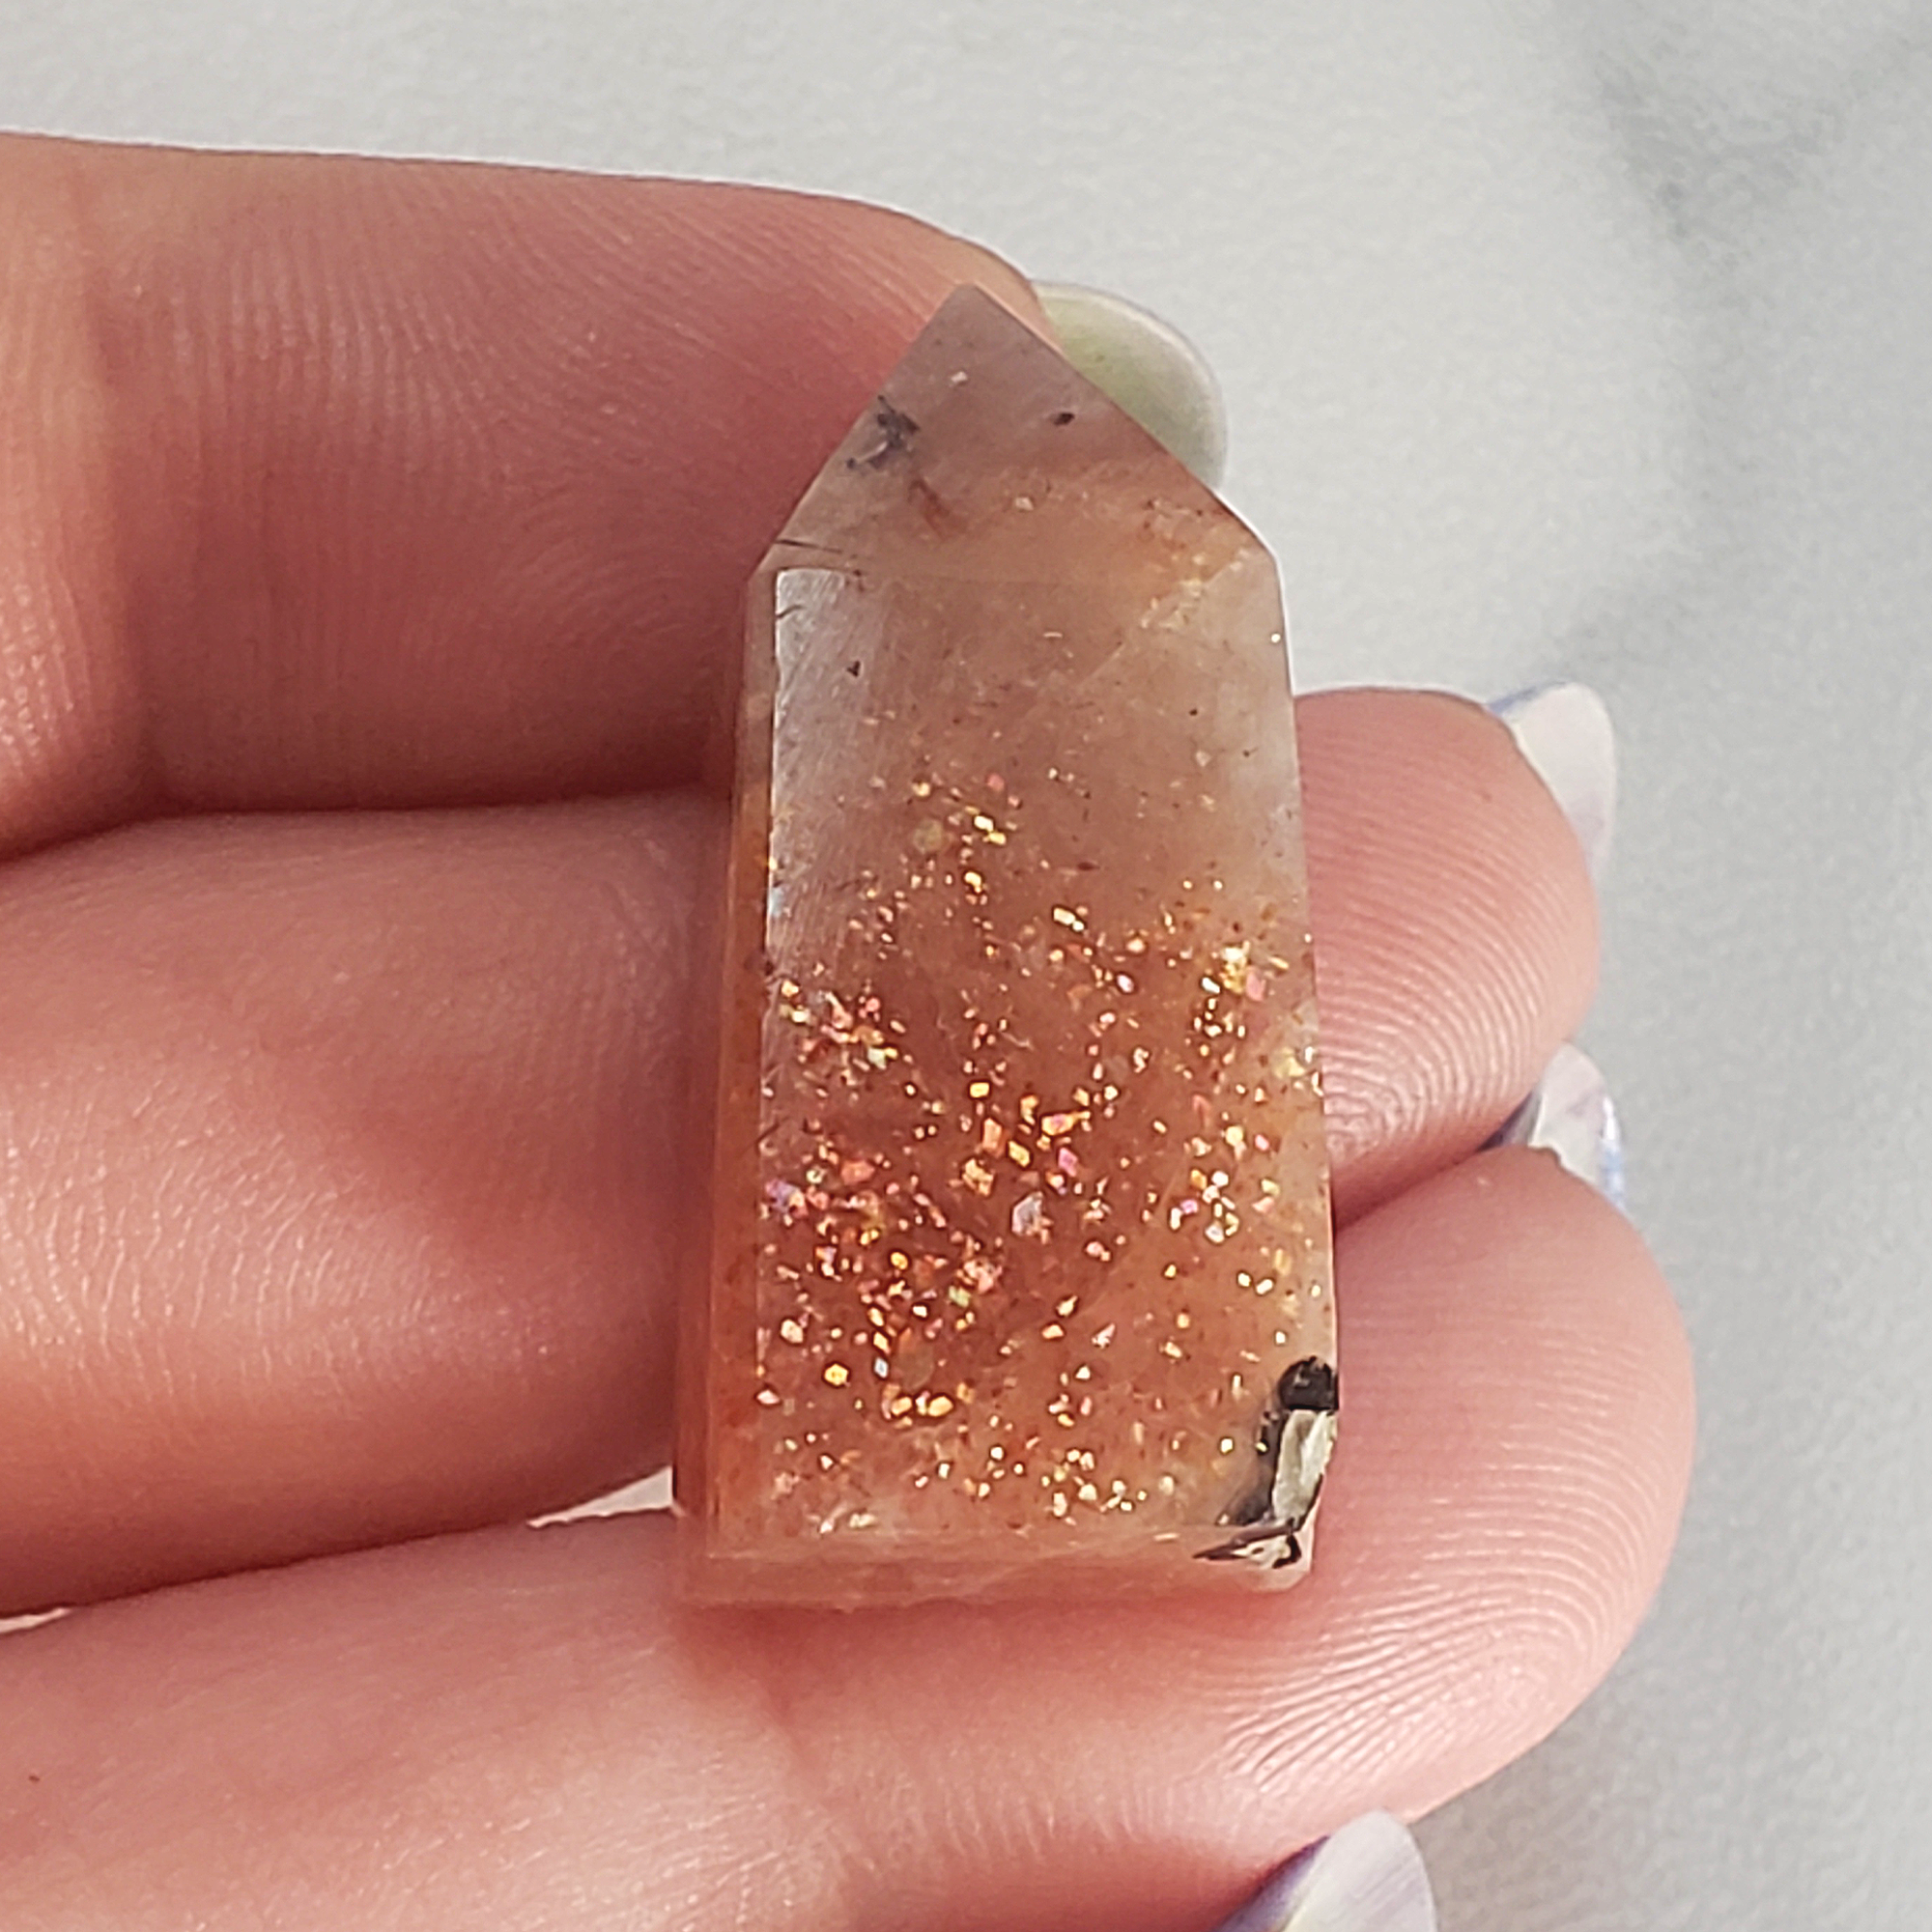 Unique MINI Confetti Sunstone Natural Crystal Tower Point - Xihe - Black Tourmaline Inclusion with Texture at the Corner